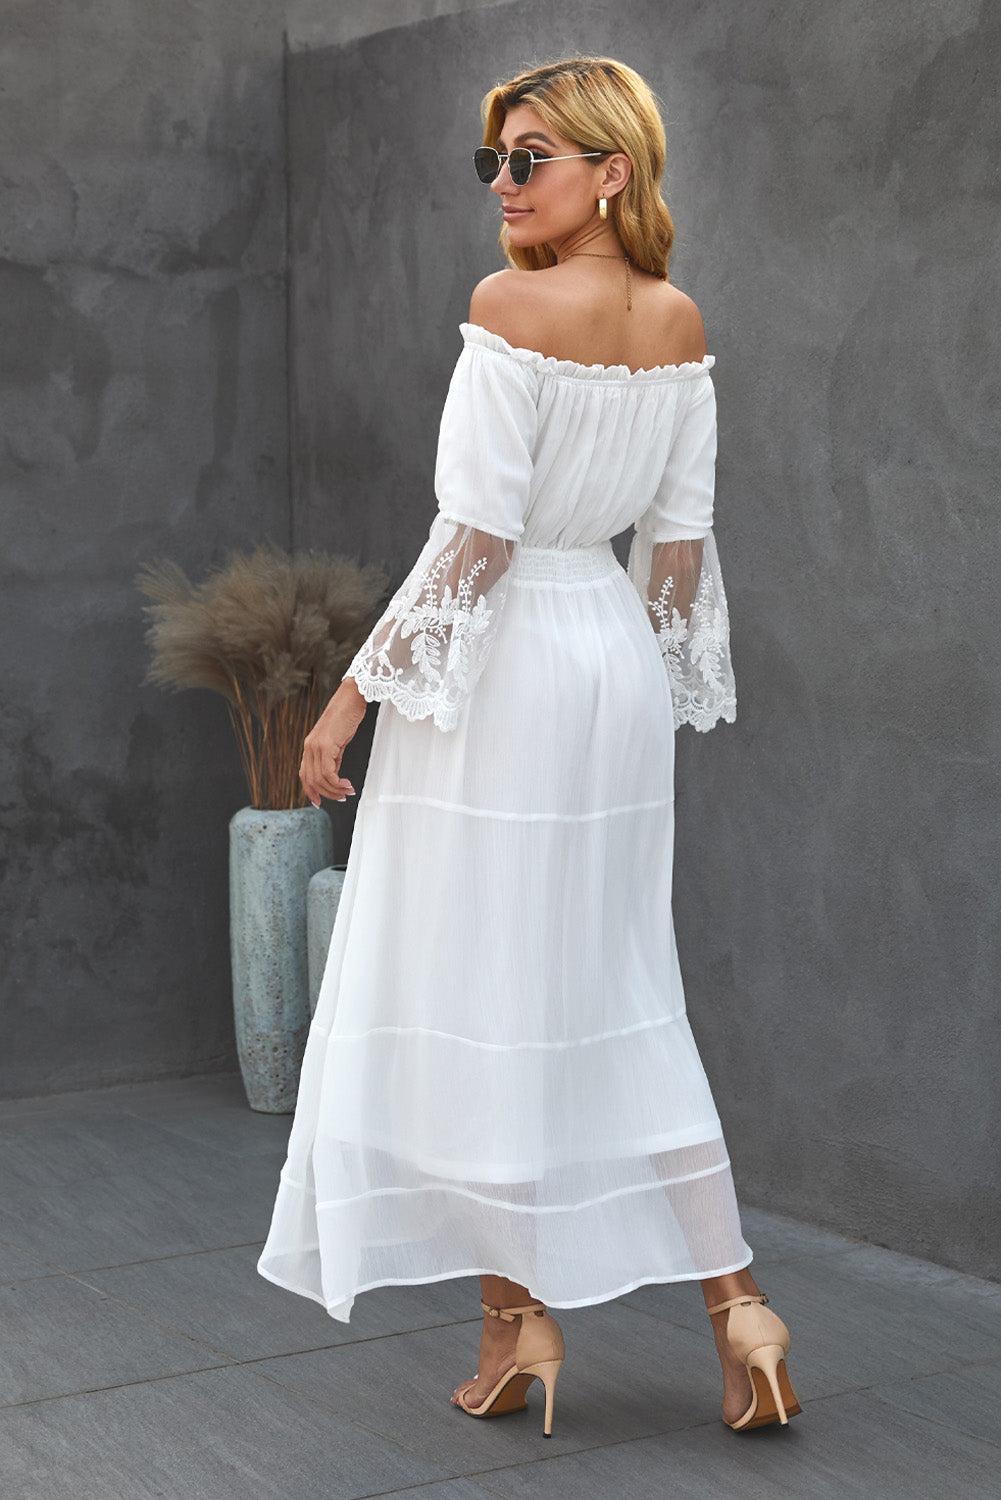 Robe Longue Dentelle Blanche Chic Brodee Manches Evasees Epaules Denudees